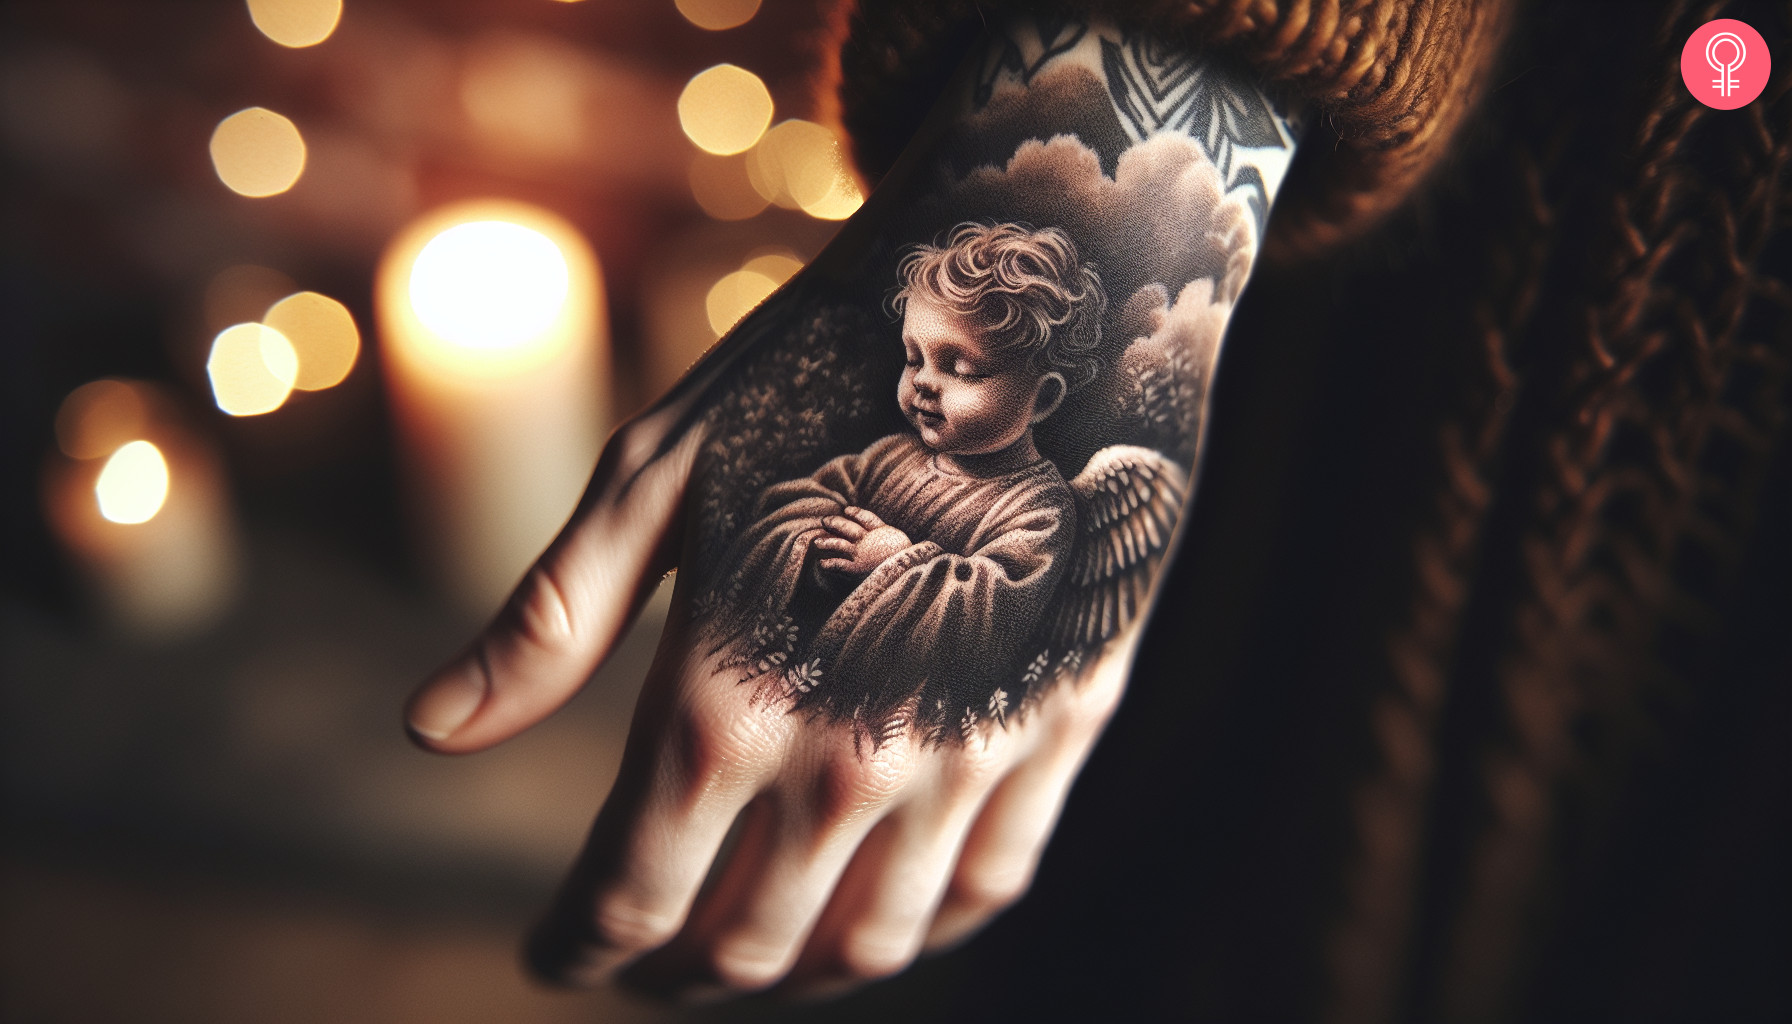 A baby angel tattoo on the hand of a woman